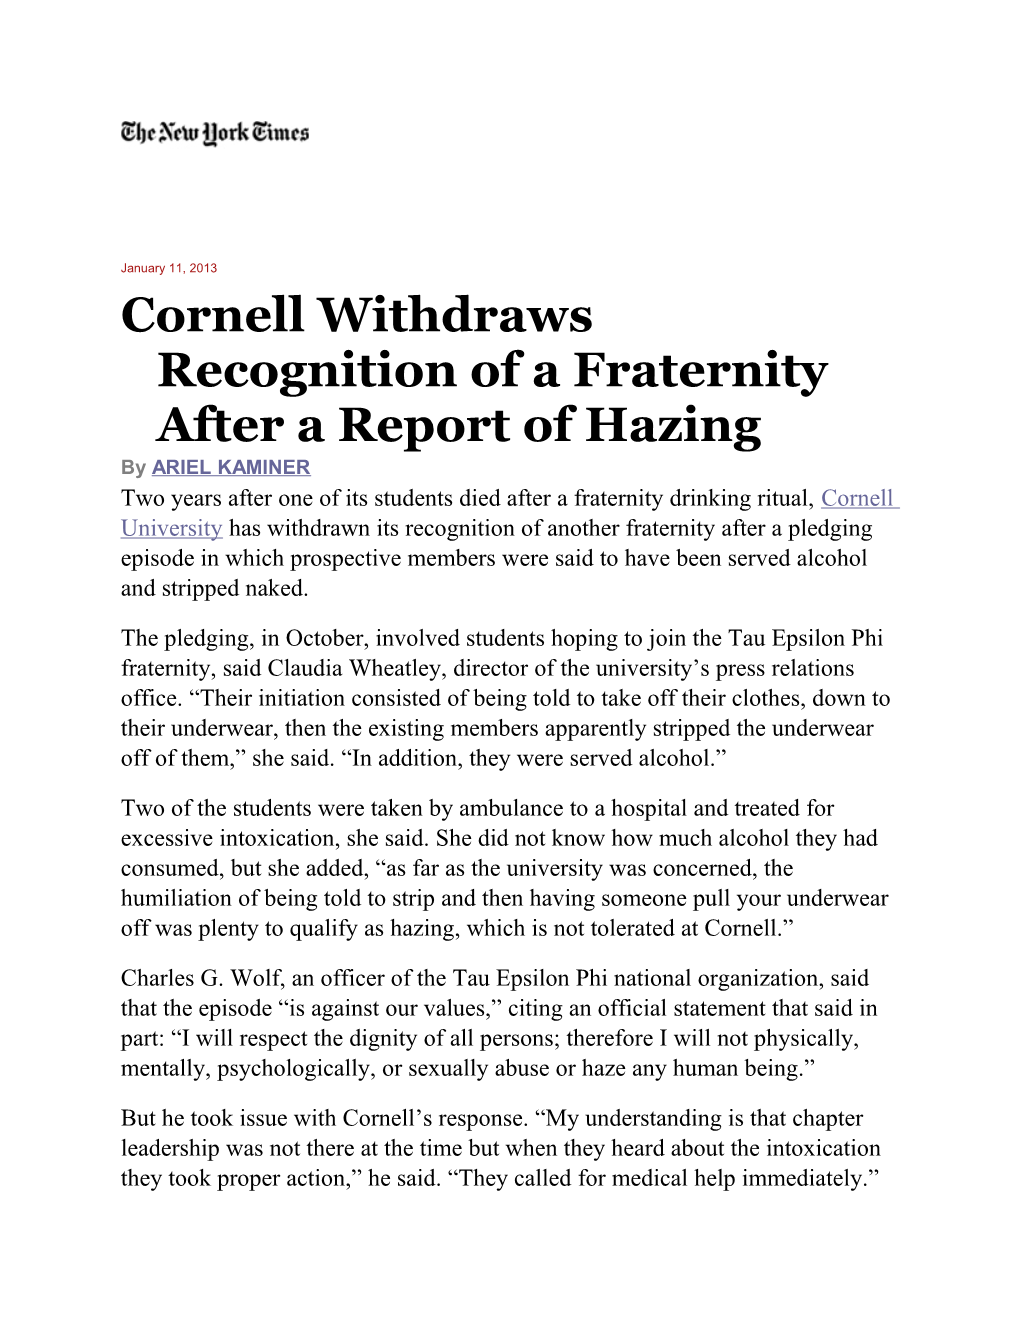 Cornell Withdraws Recognition of a Fraternity After a Report of Hazing